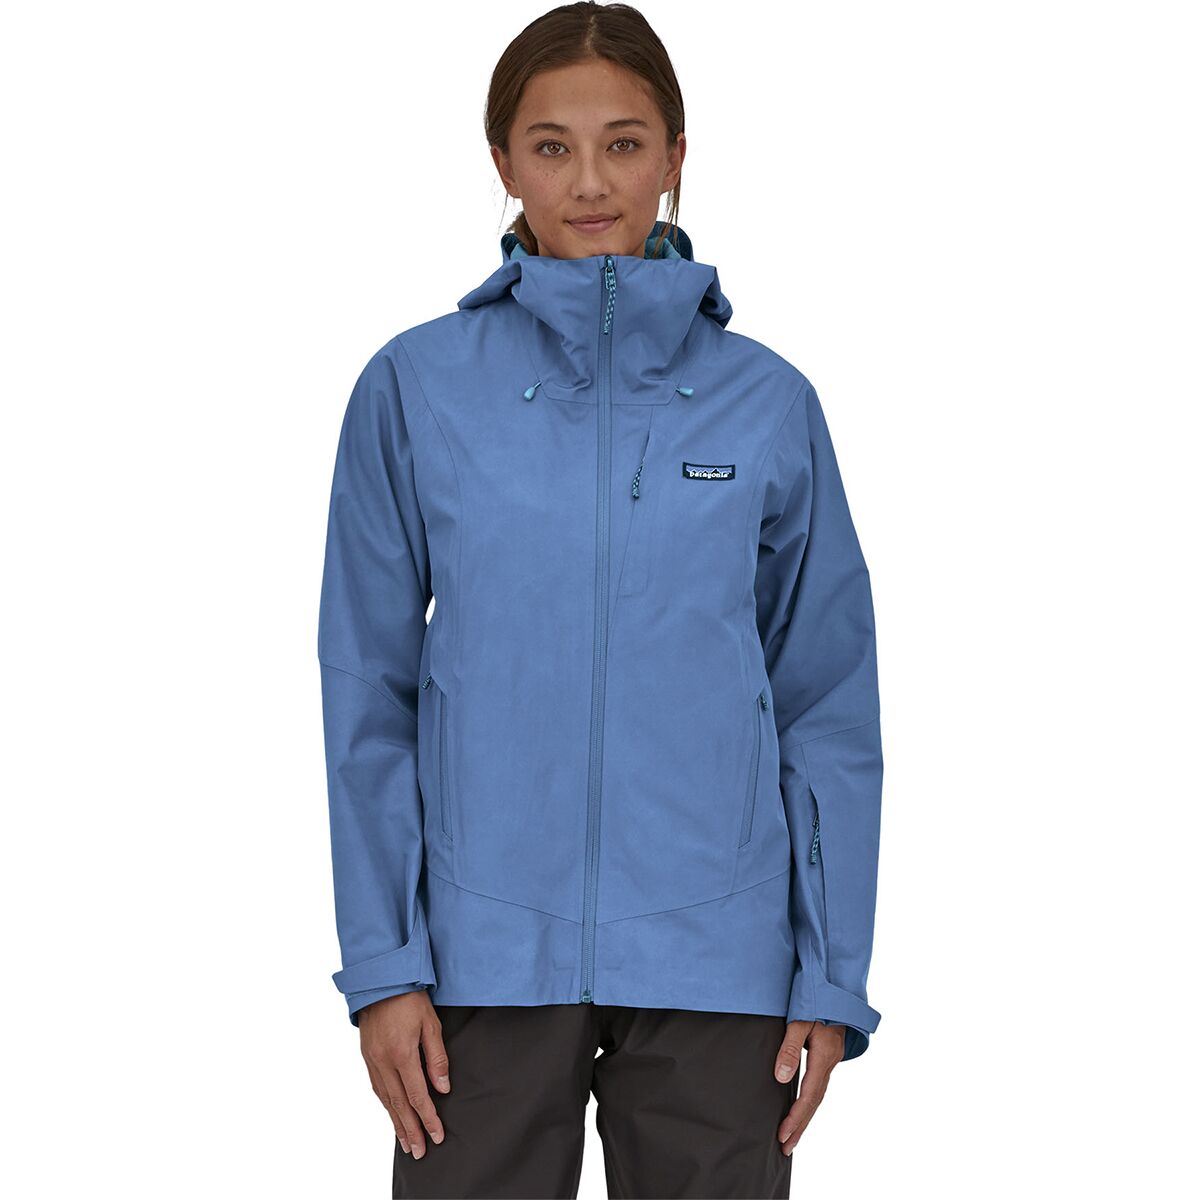 Patagonia Storm Shift Jacket - Women's Current Blue